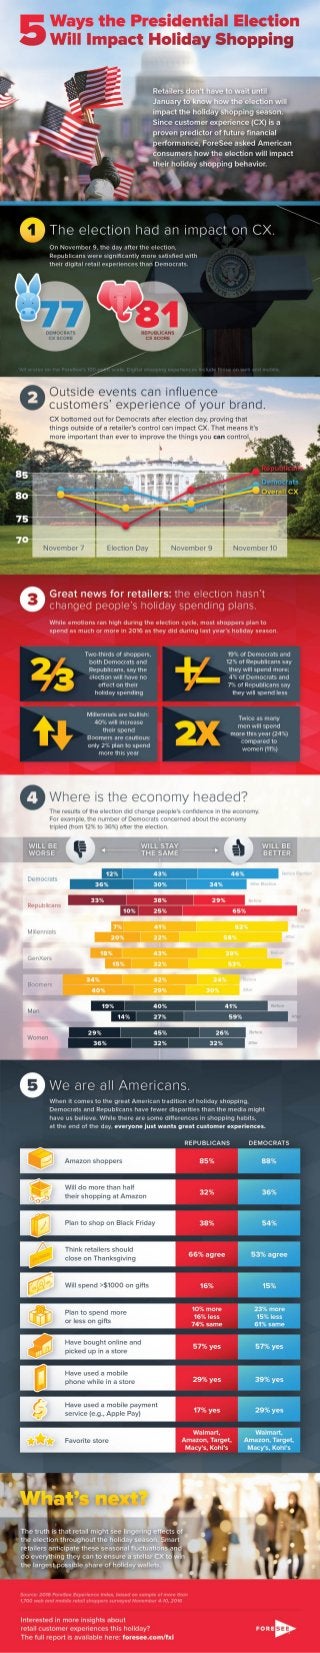 5 Ways the U.S. Presidential Election Will Impact Holiday Shopping [Infographic]